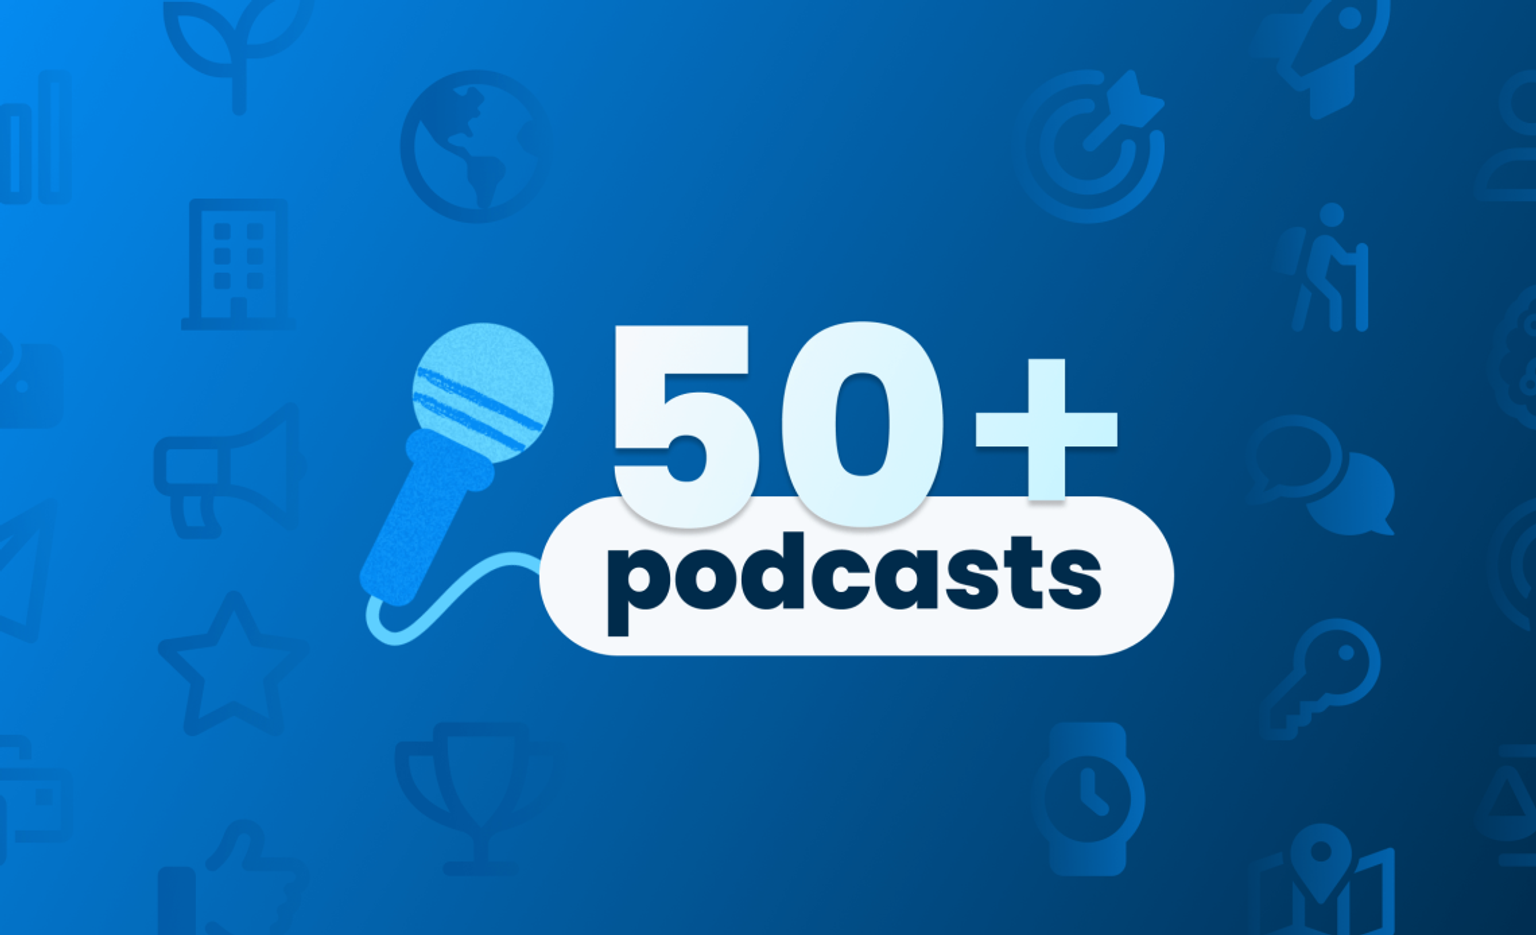 50+ podcasts